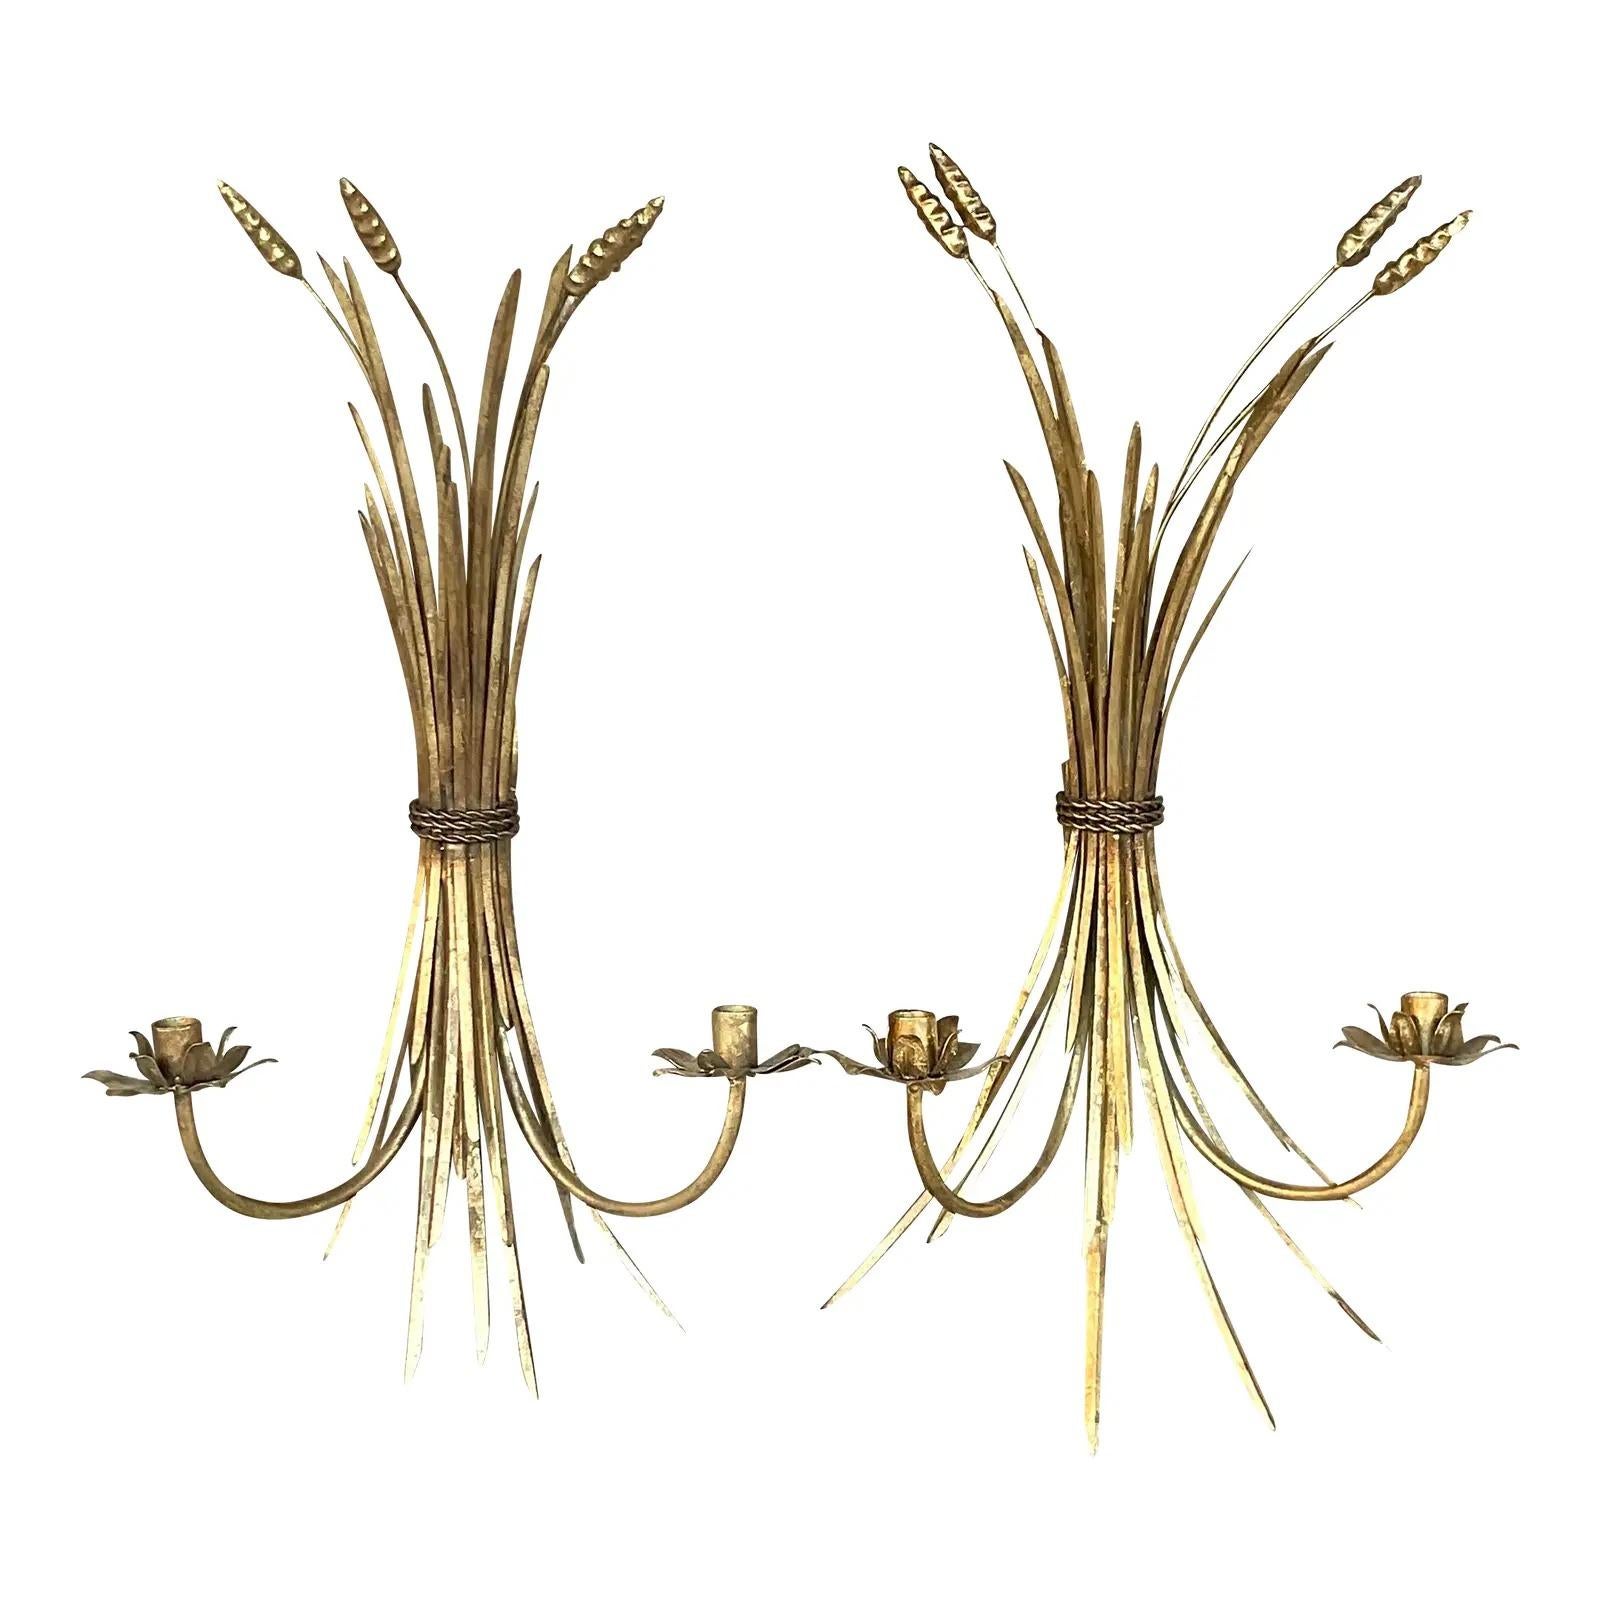 A fabulous pair of vintage Gilt candle sconces. An iconic wheat sheath design with two candle holders each. Acquired from a Palm Beach estate. 